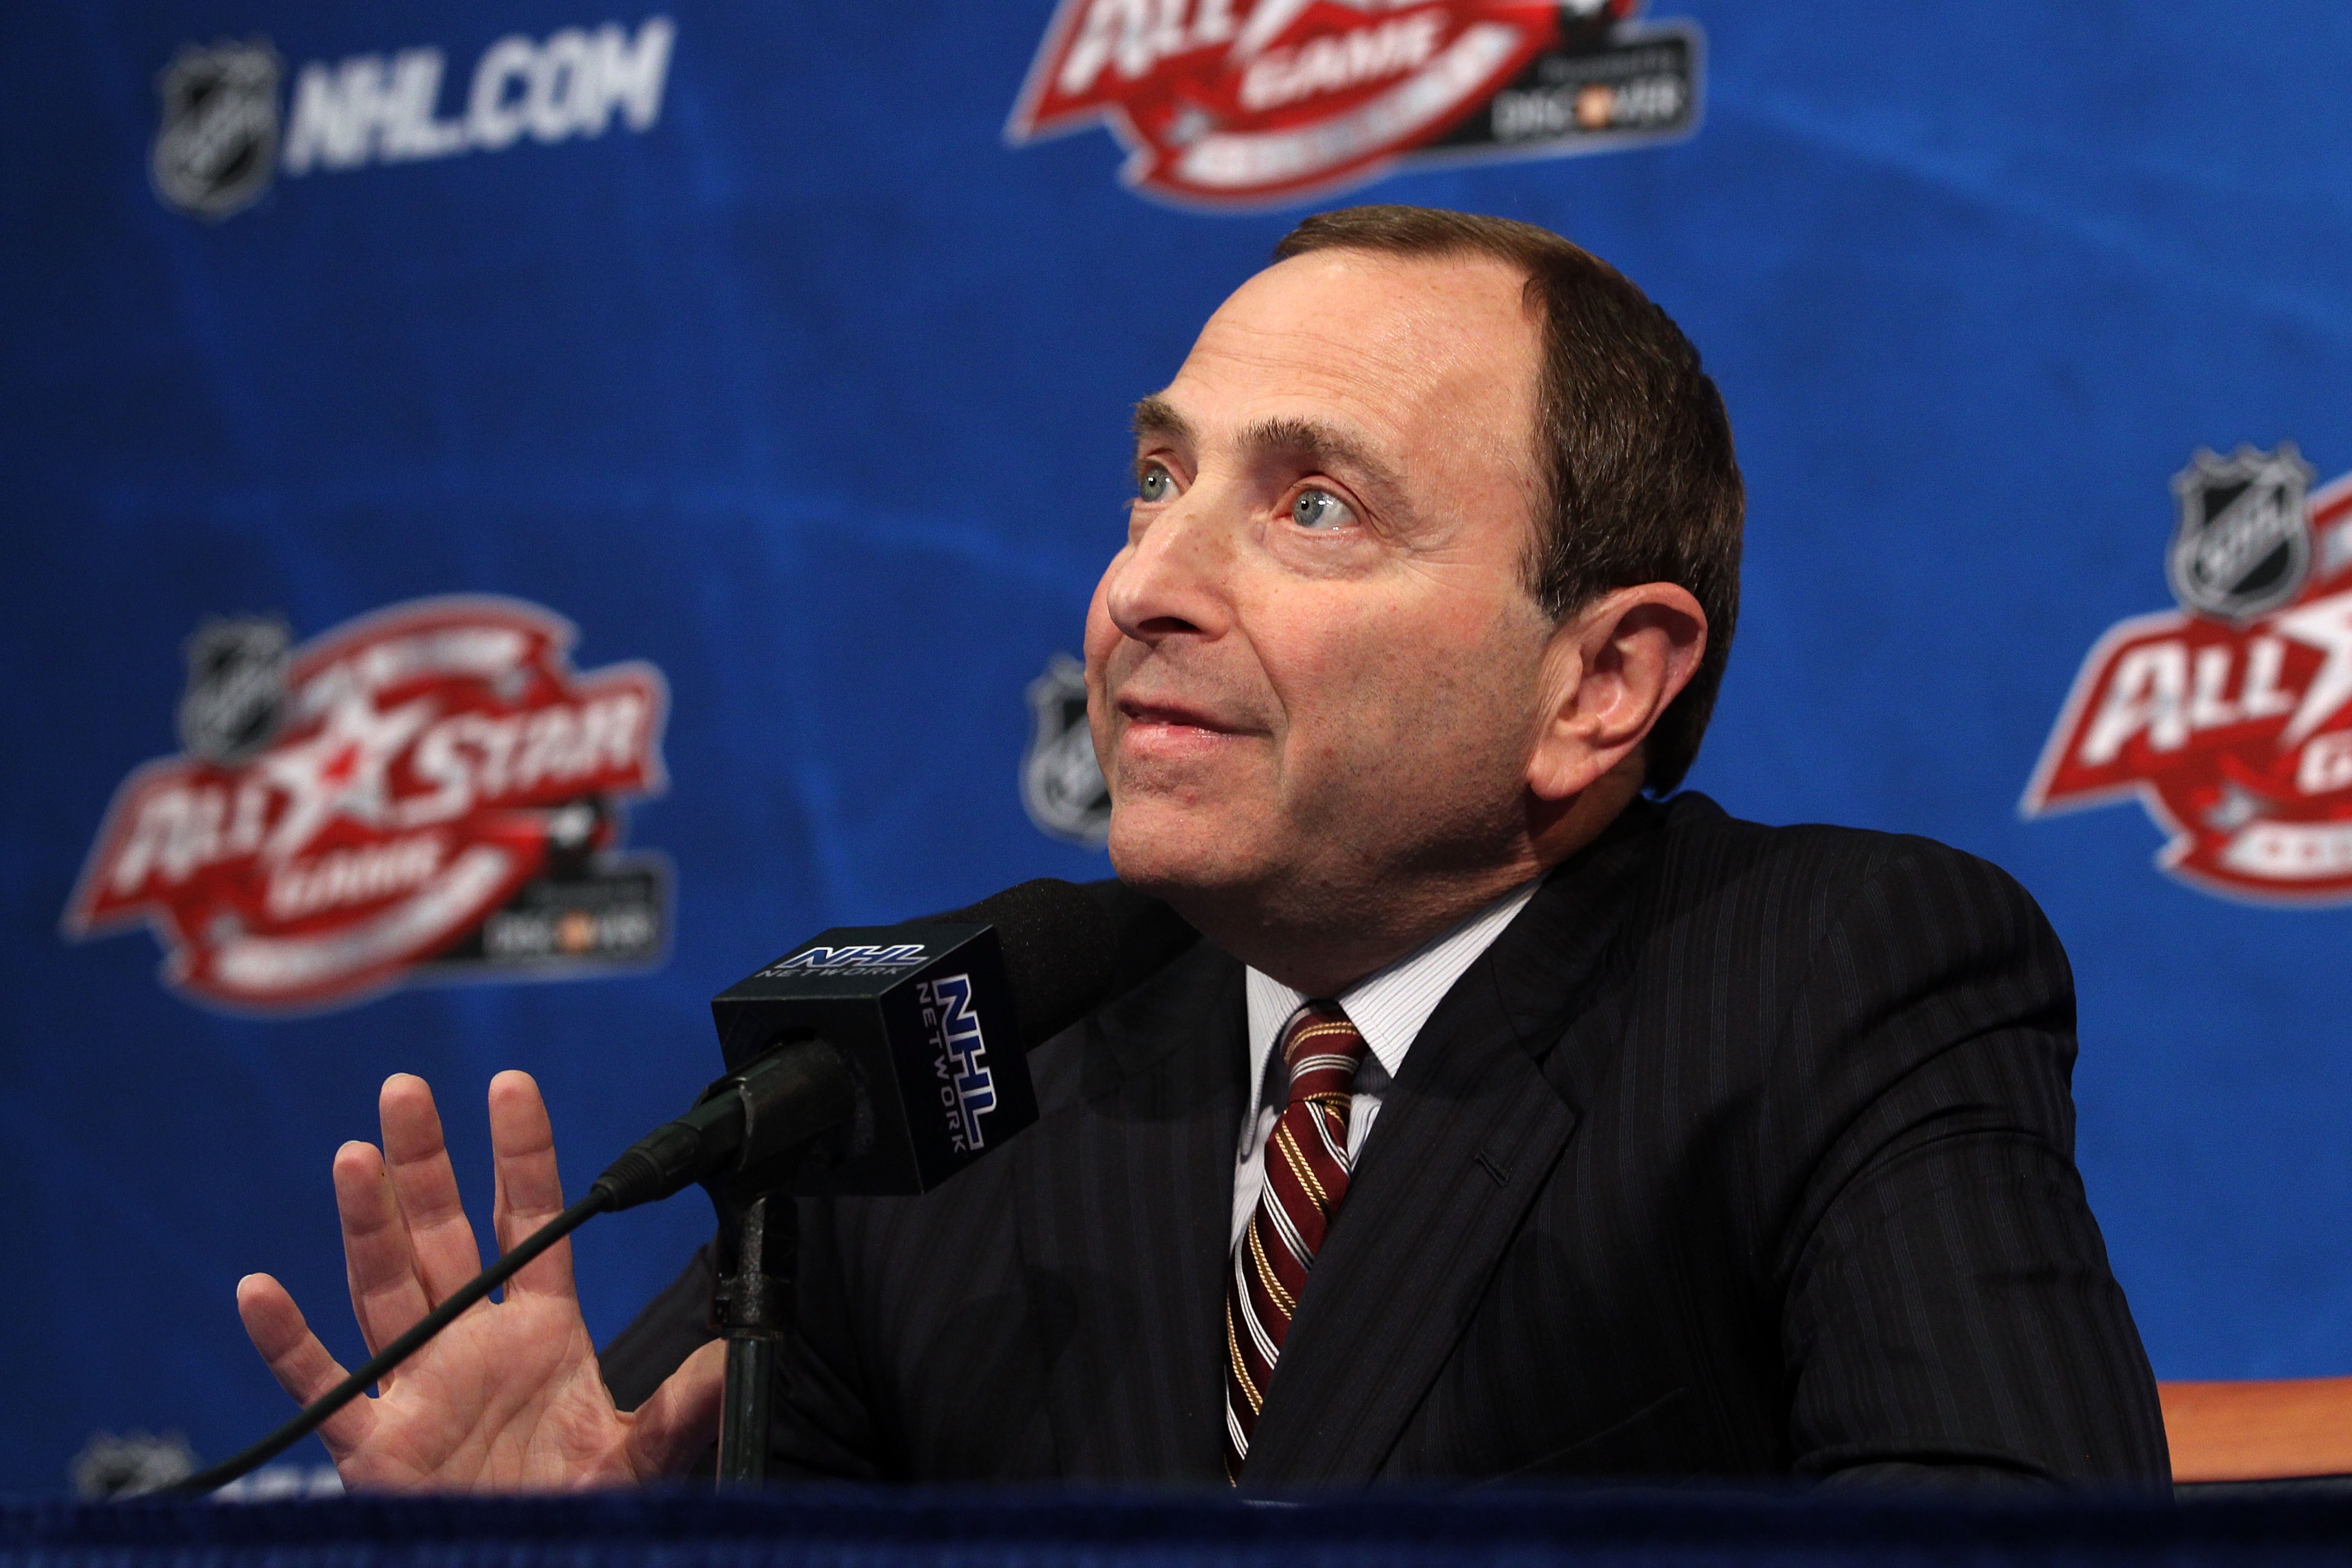 RALEIGH, NC - JANUARY 29:  NHL Commissioner Gary Bettman speaks at a press conference during the 2011 NHL All-Star Weekend at the RBC Center on January 29, 2011 in Raleigh, North Carolina.  (Photo by Bruce Bennett/Getty Images)